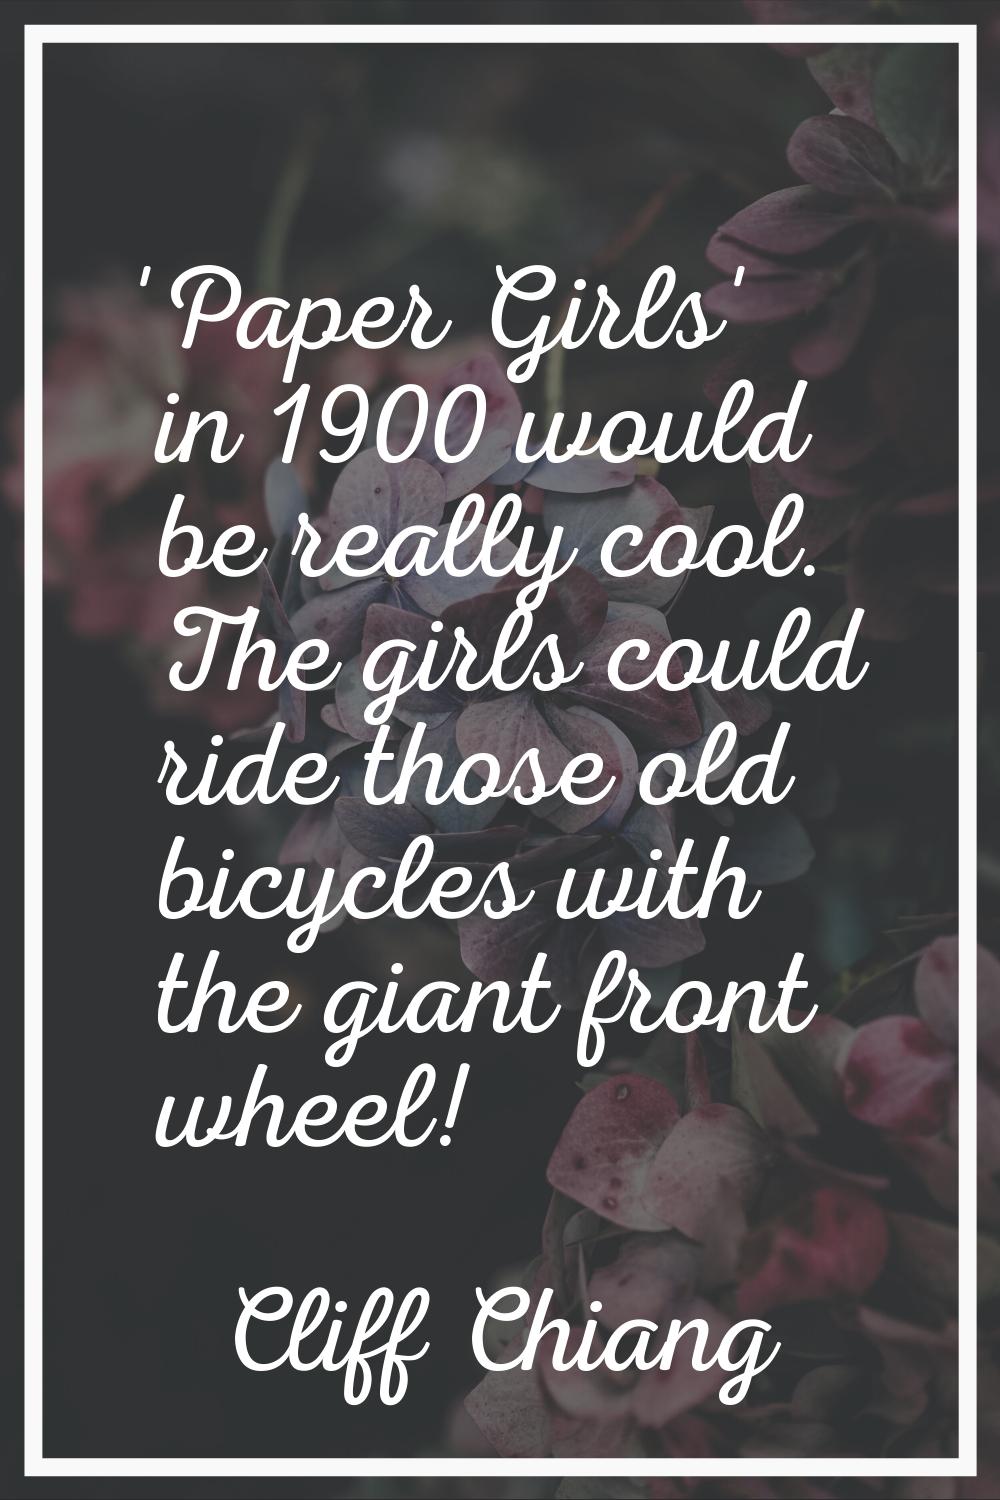 'Paper Girls' in 1900 would be really cool. The girls could ride those old bicycles with the giant 